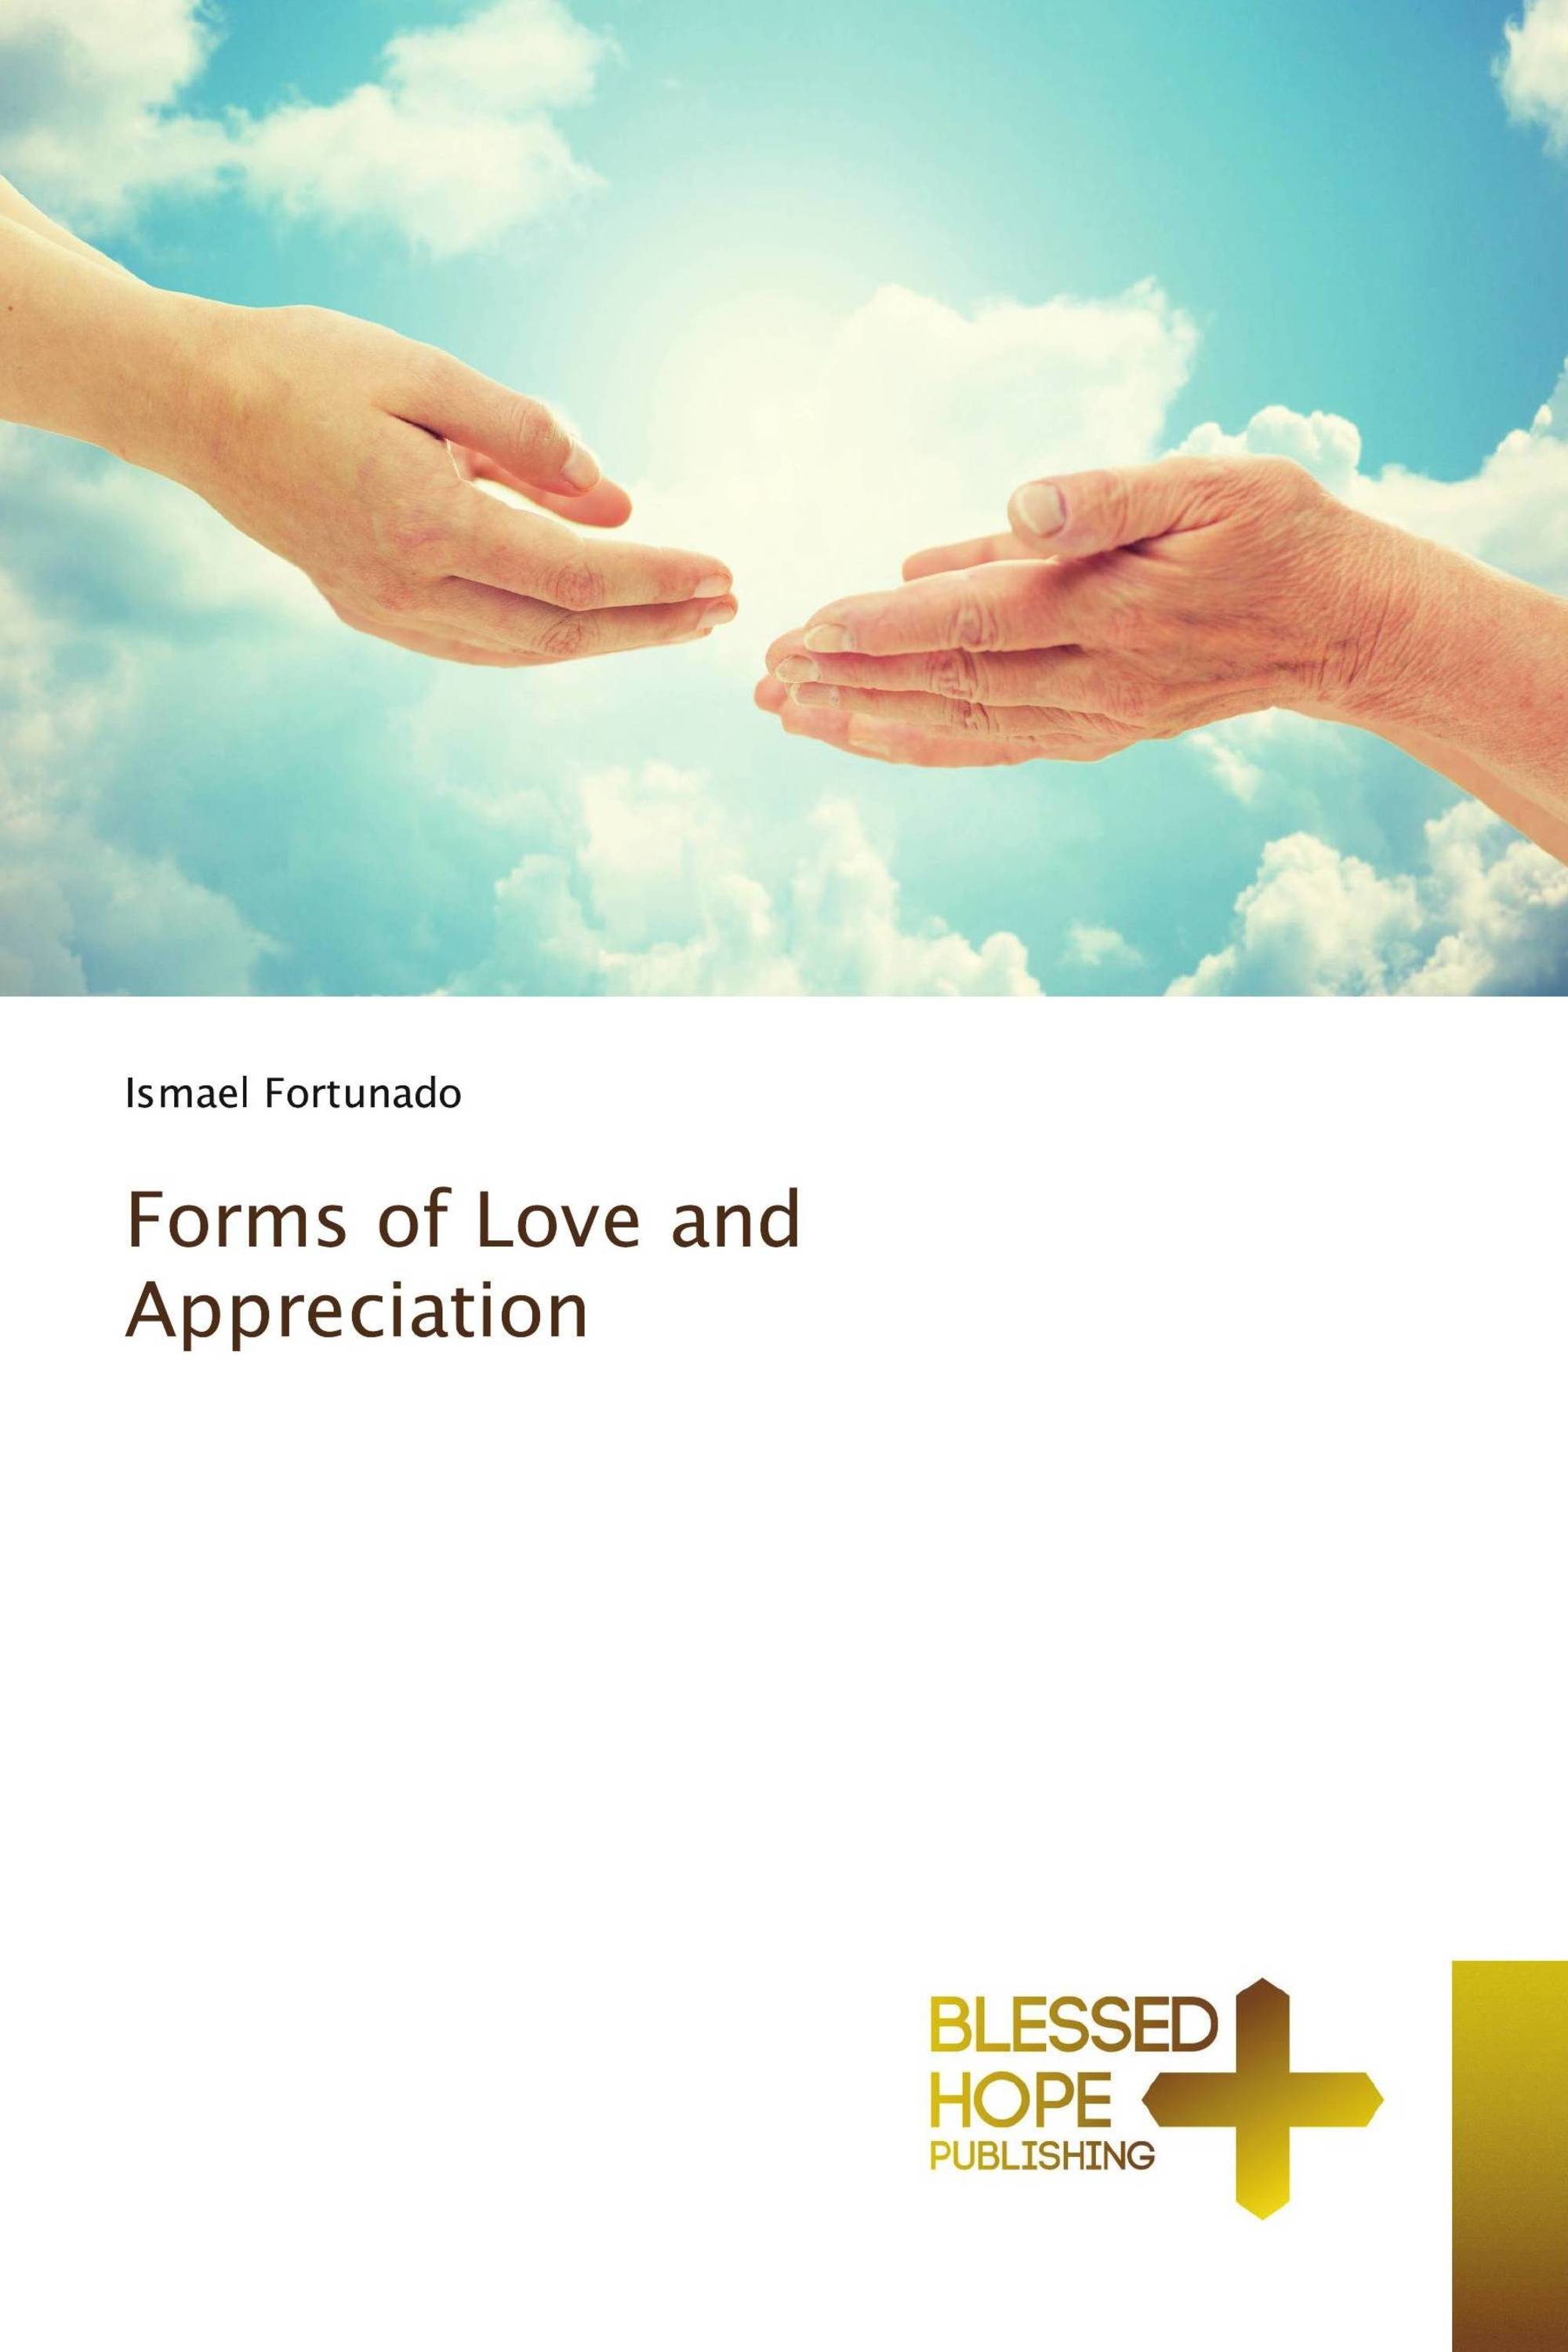 Forms of Love and Appreciation